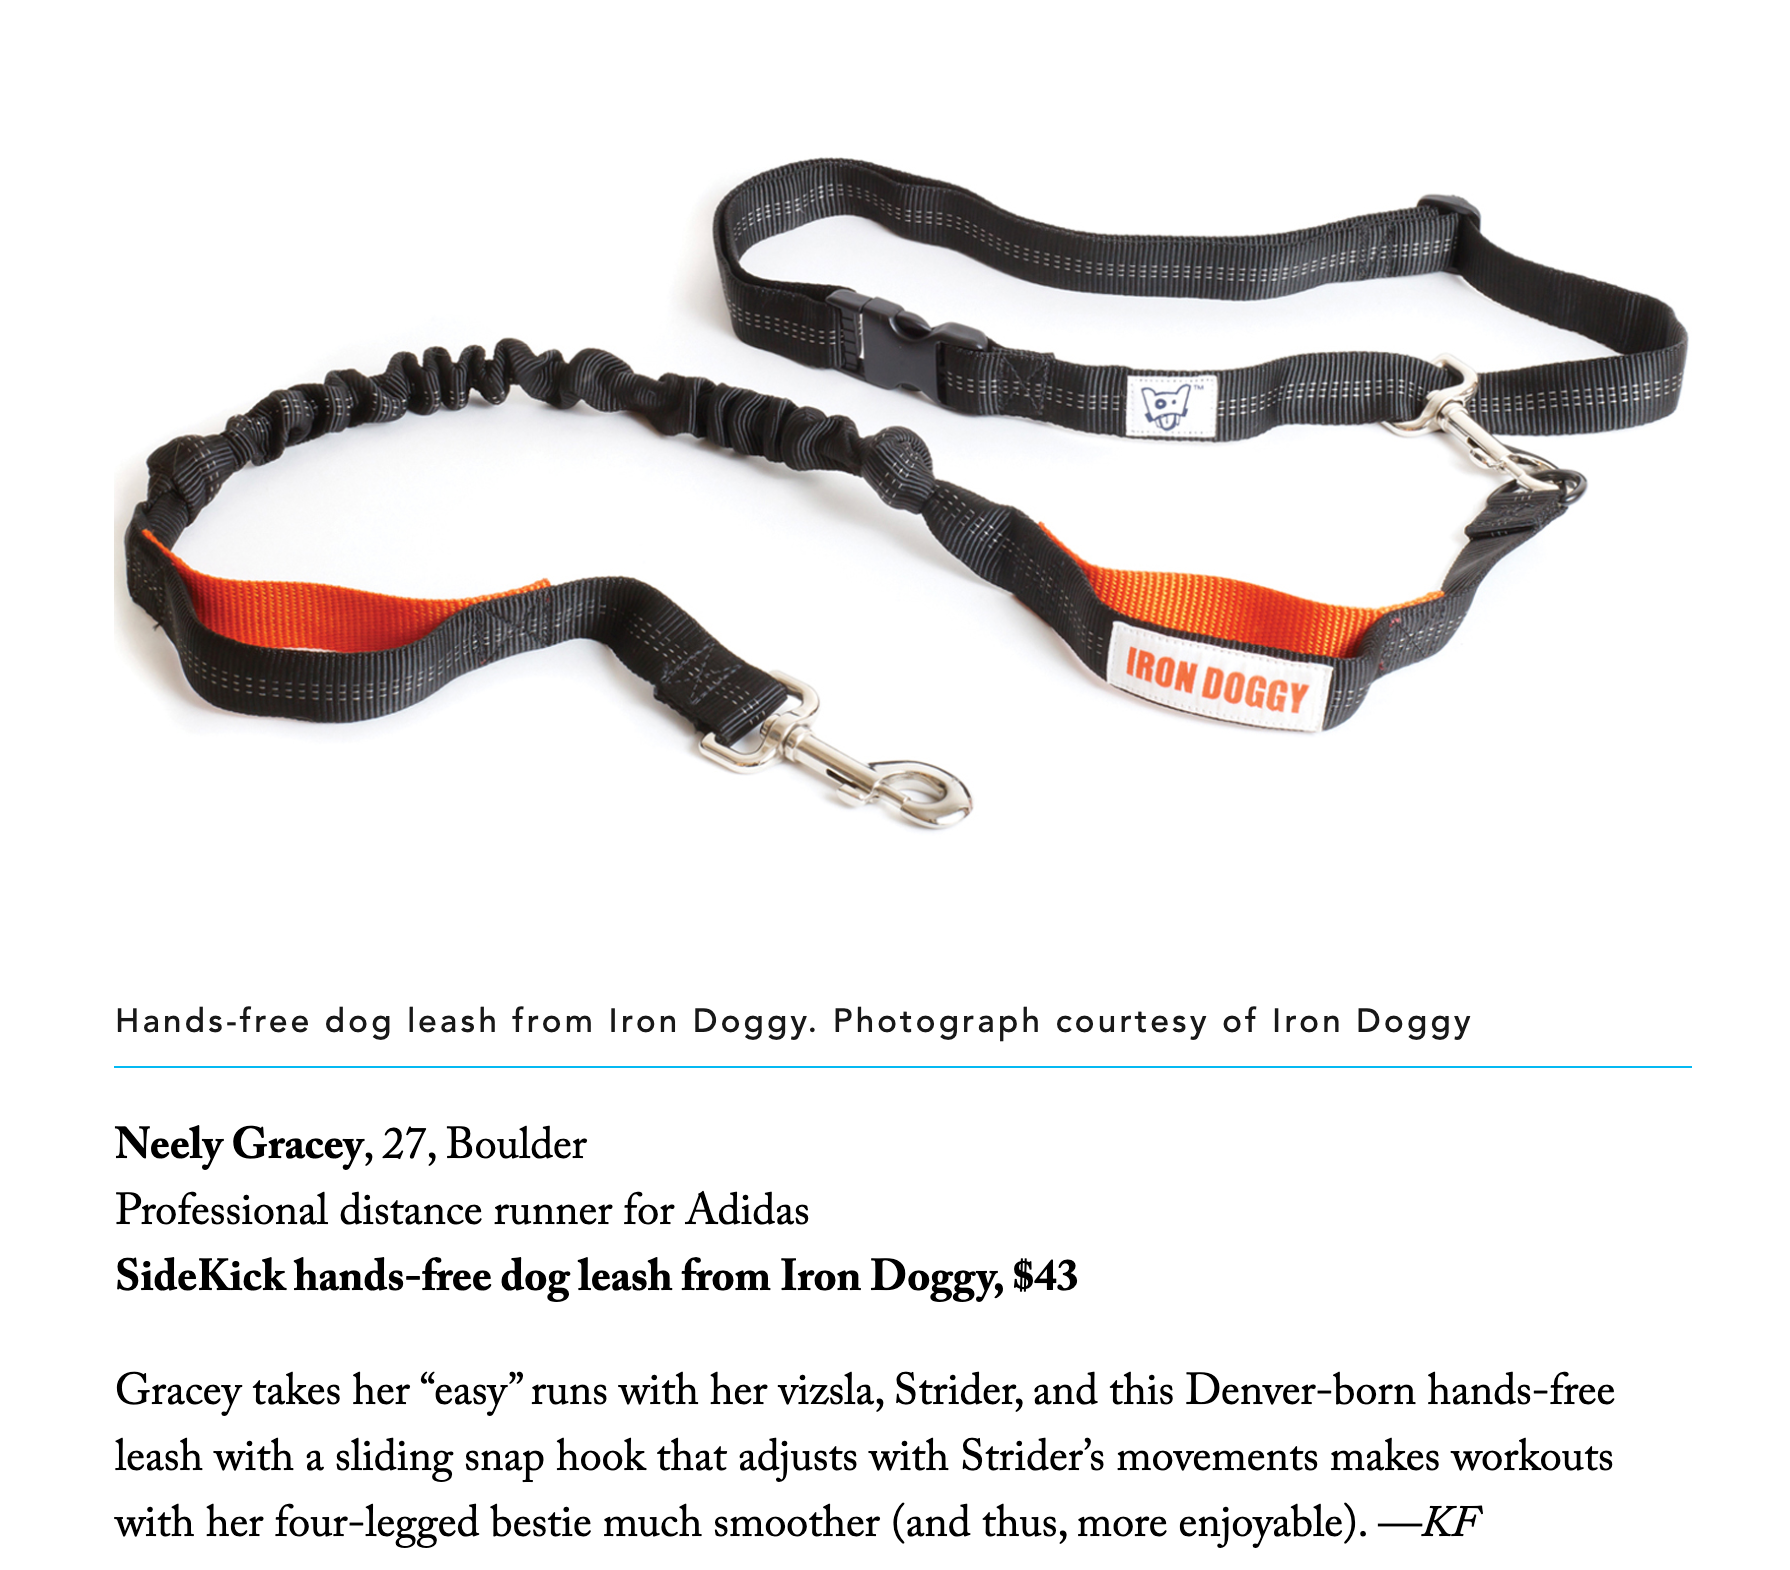 Iron Doggy™ is in 5280 Magazine's "Ultimate Guide to Running"